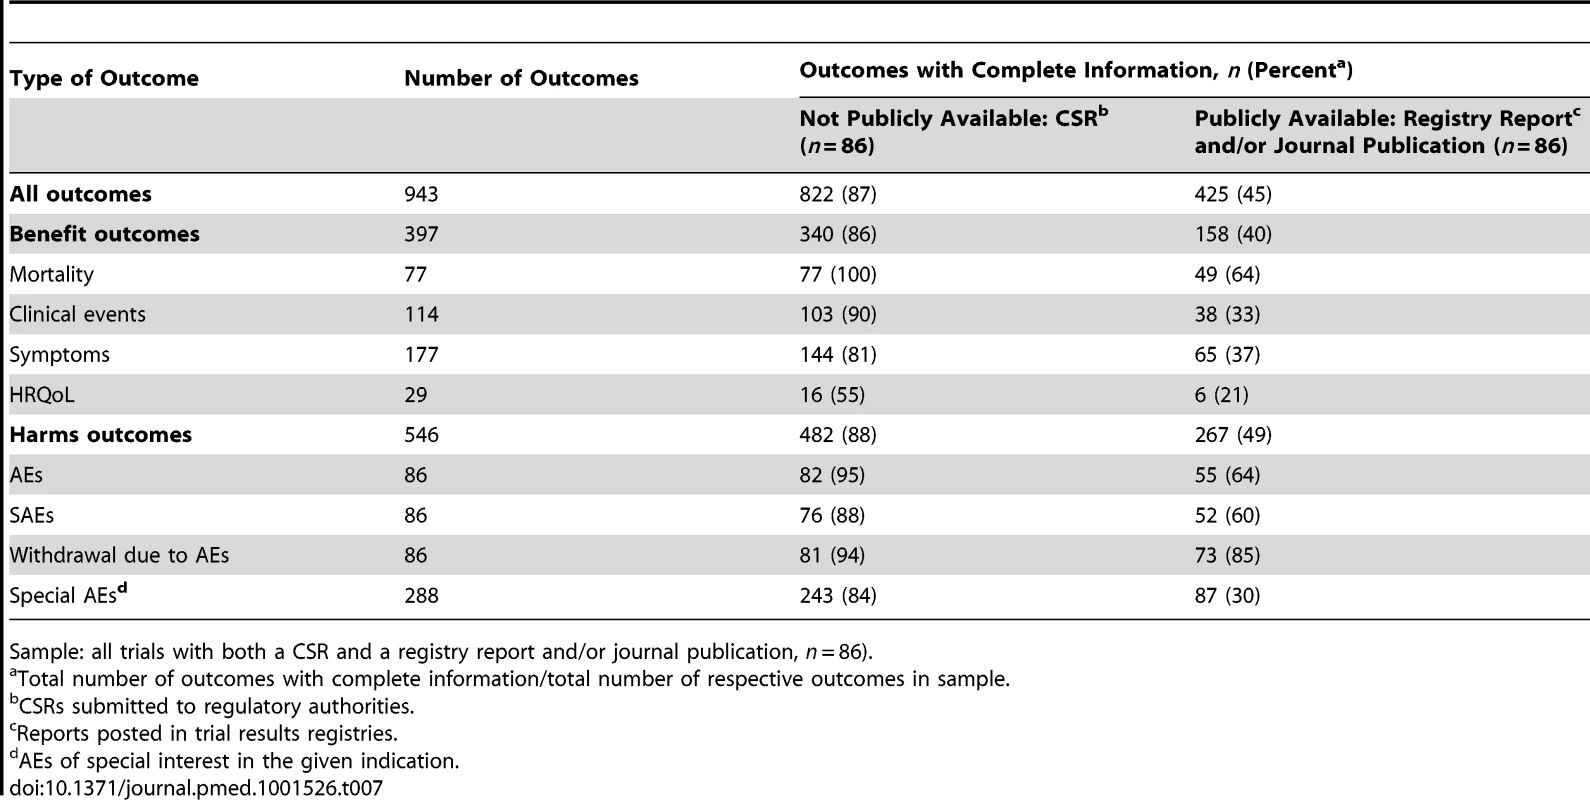 Analysis of completeness of information for trial outcomes in CSRs versus publicly available sources, i.e., registry reports and/or journal publications.